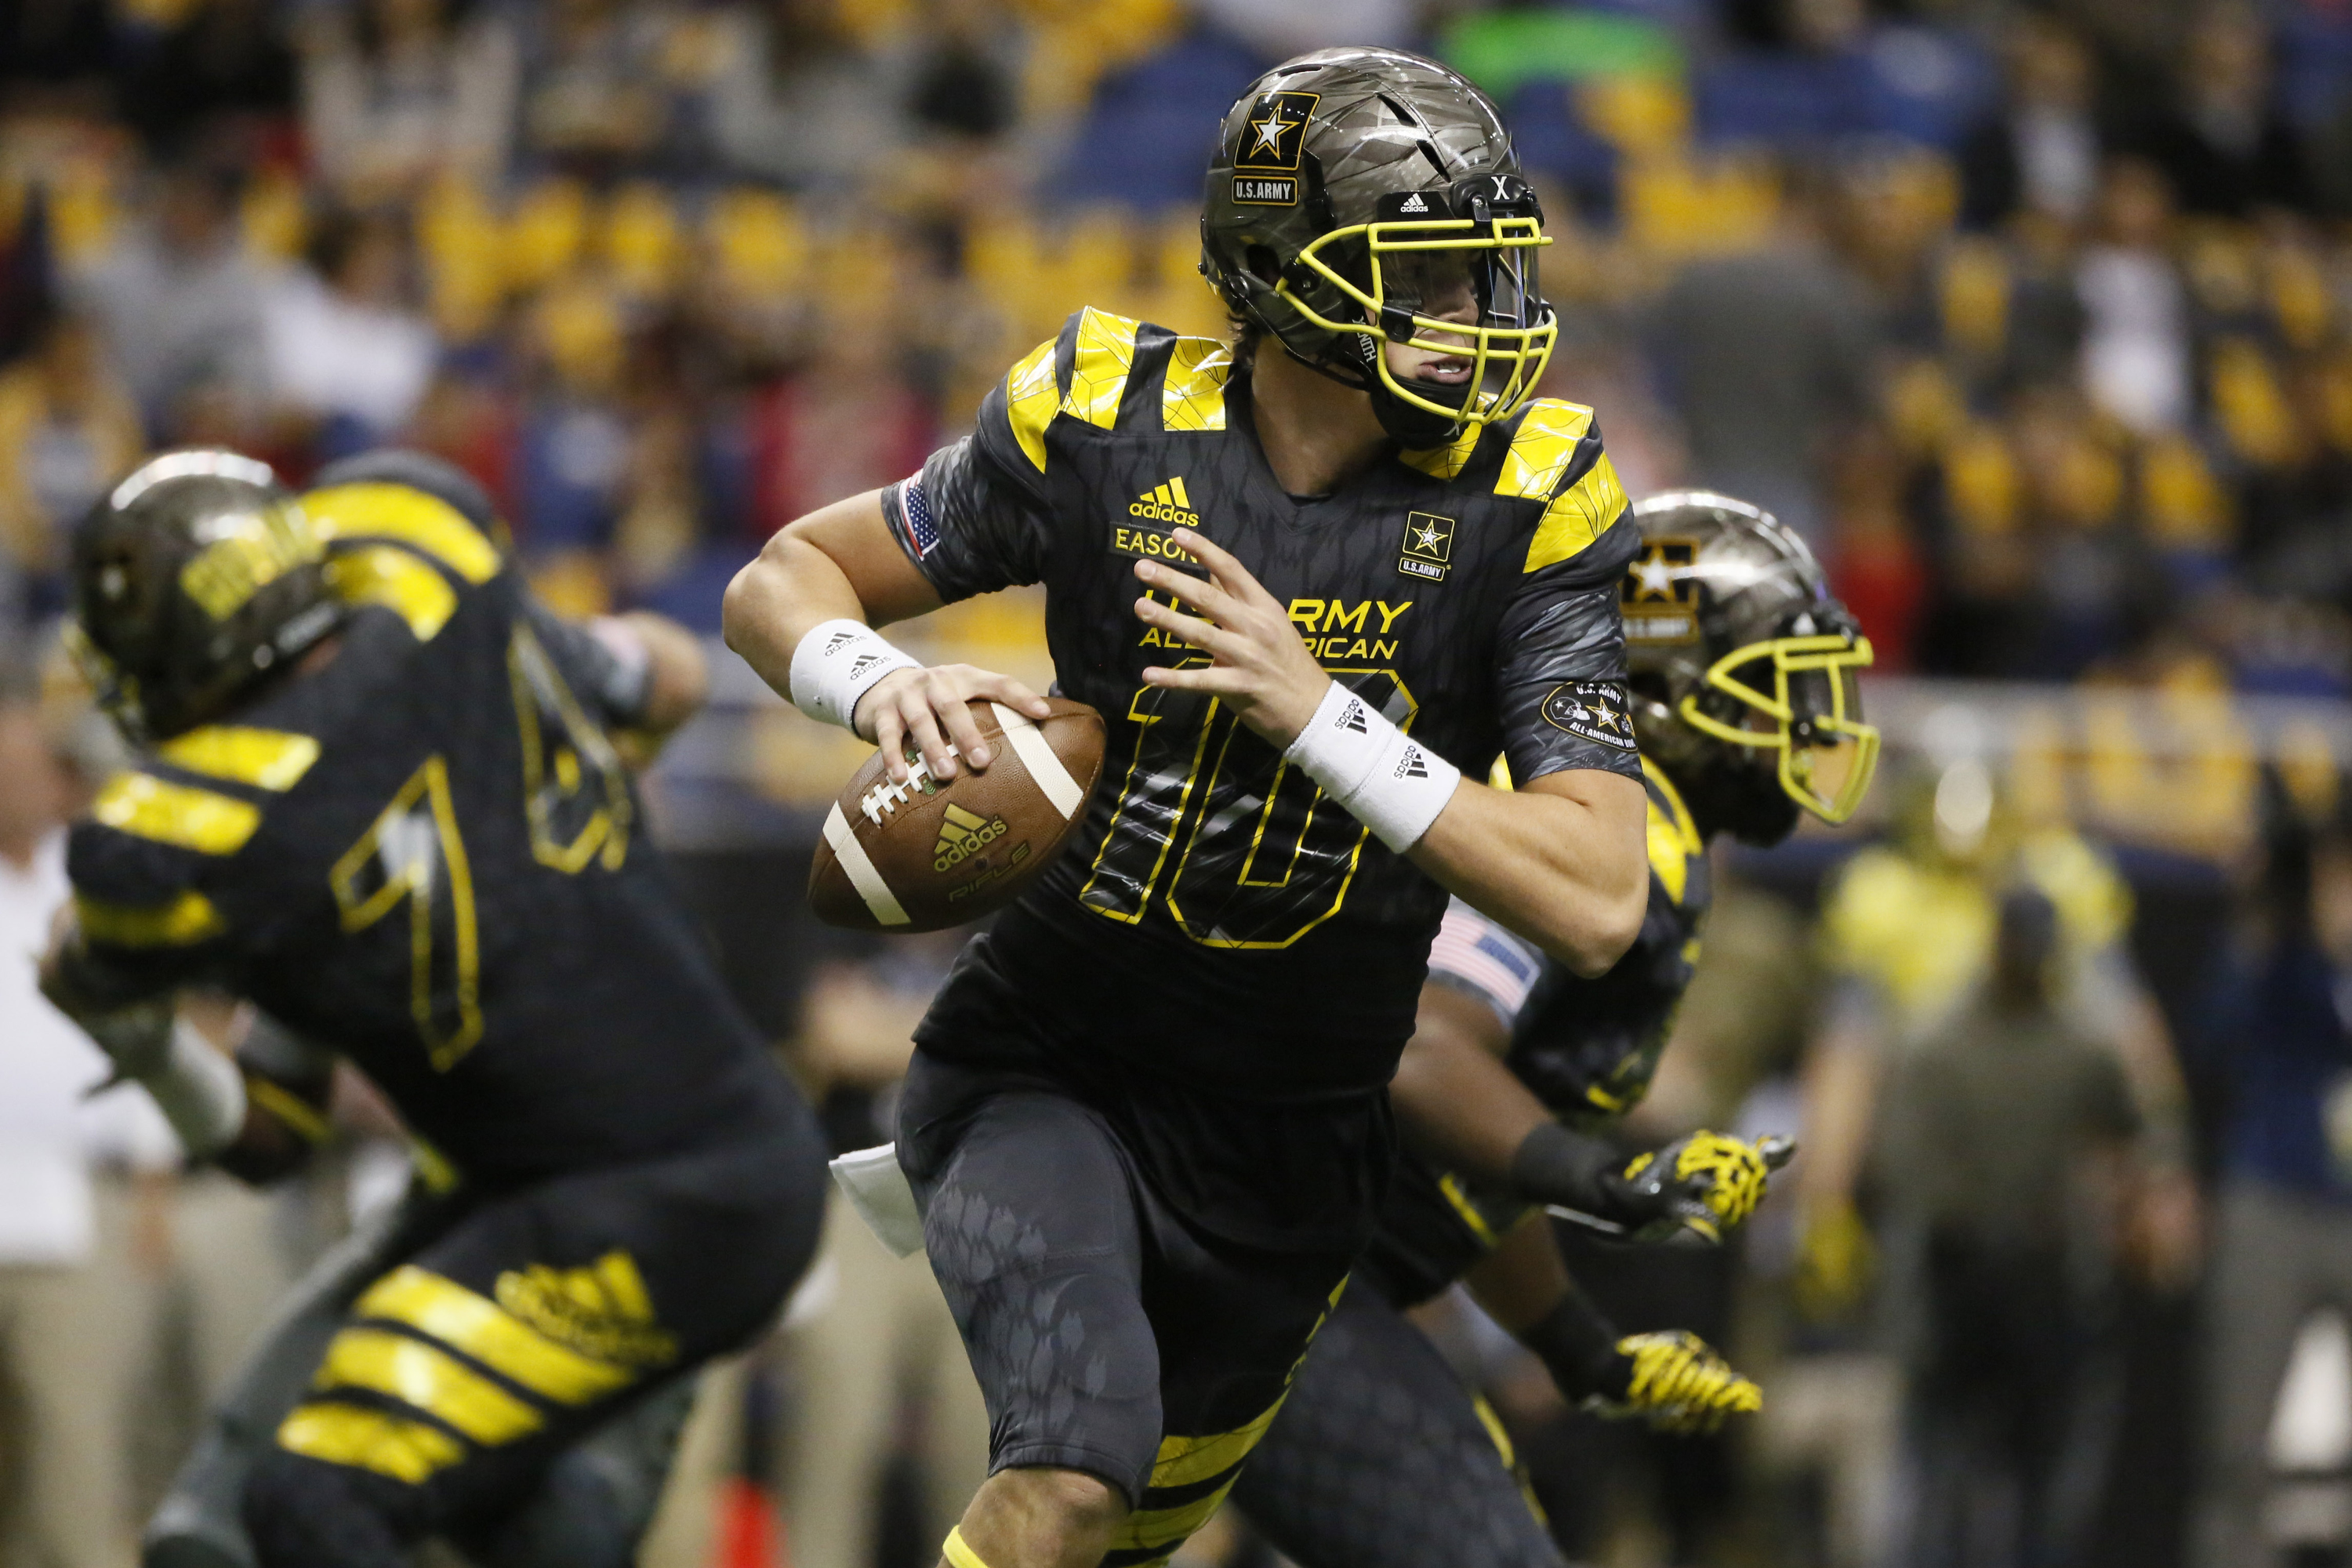 East quarterback Jacob Eason (10) looks to throw during the Army All-American Bowl (Photo: Soobum Im, USA TODAY Sports)